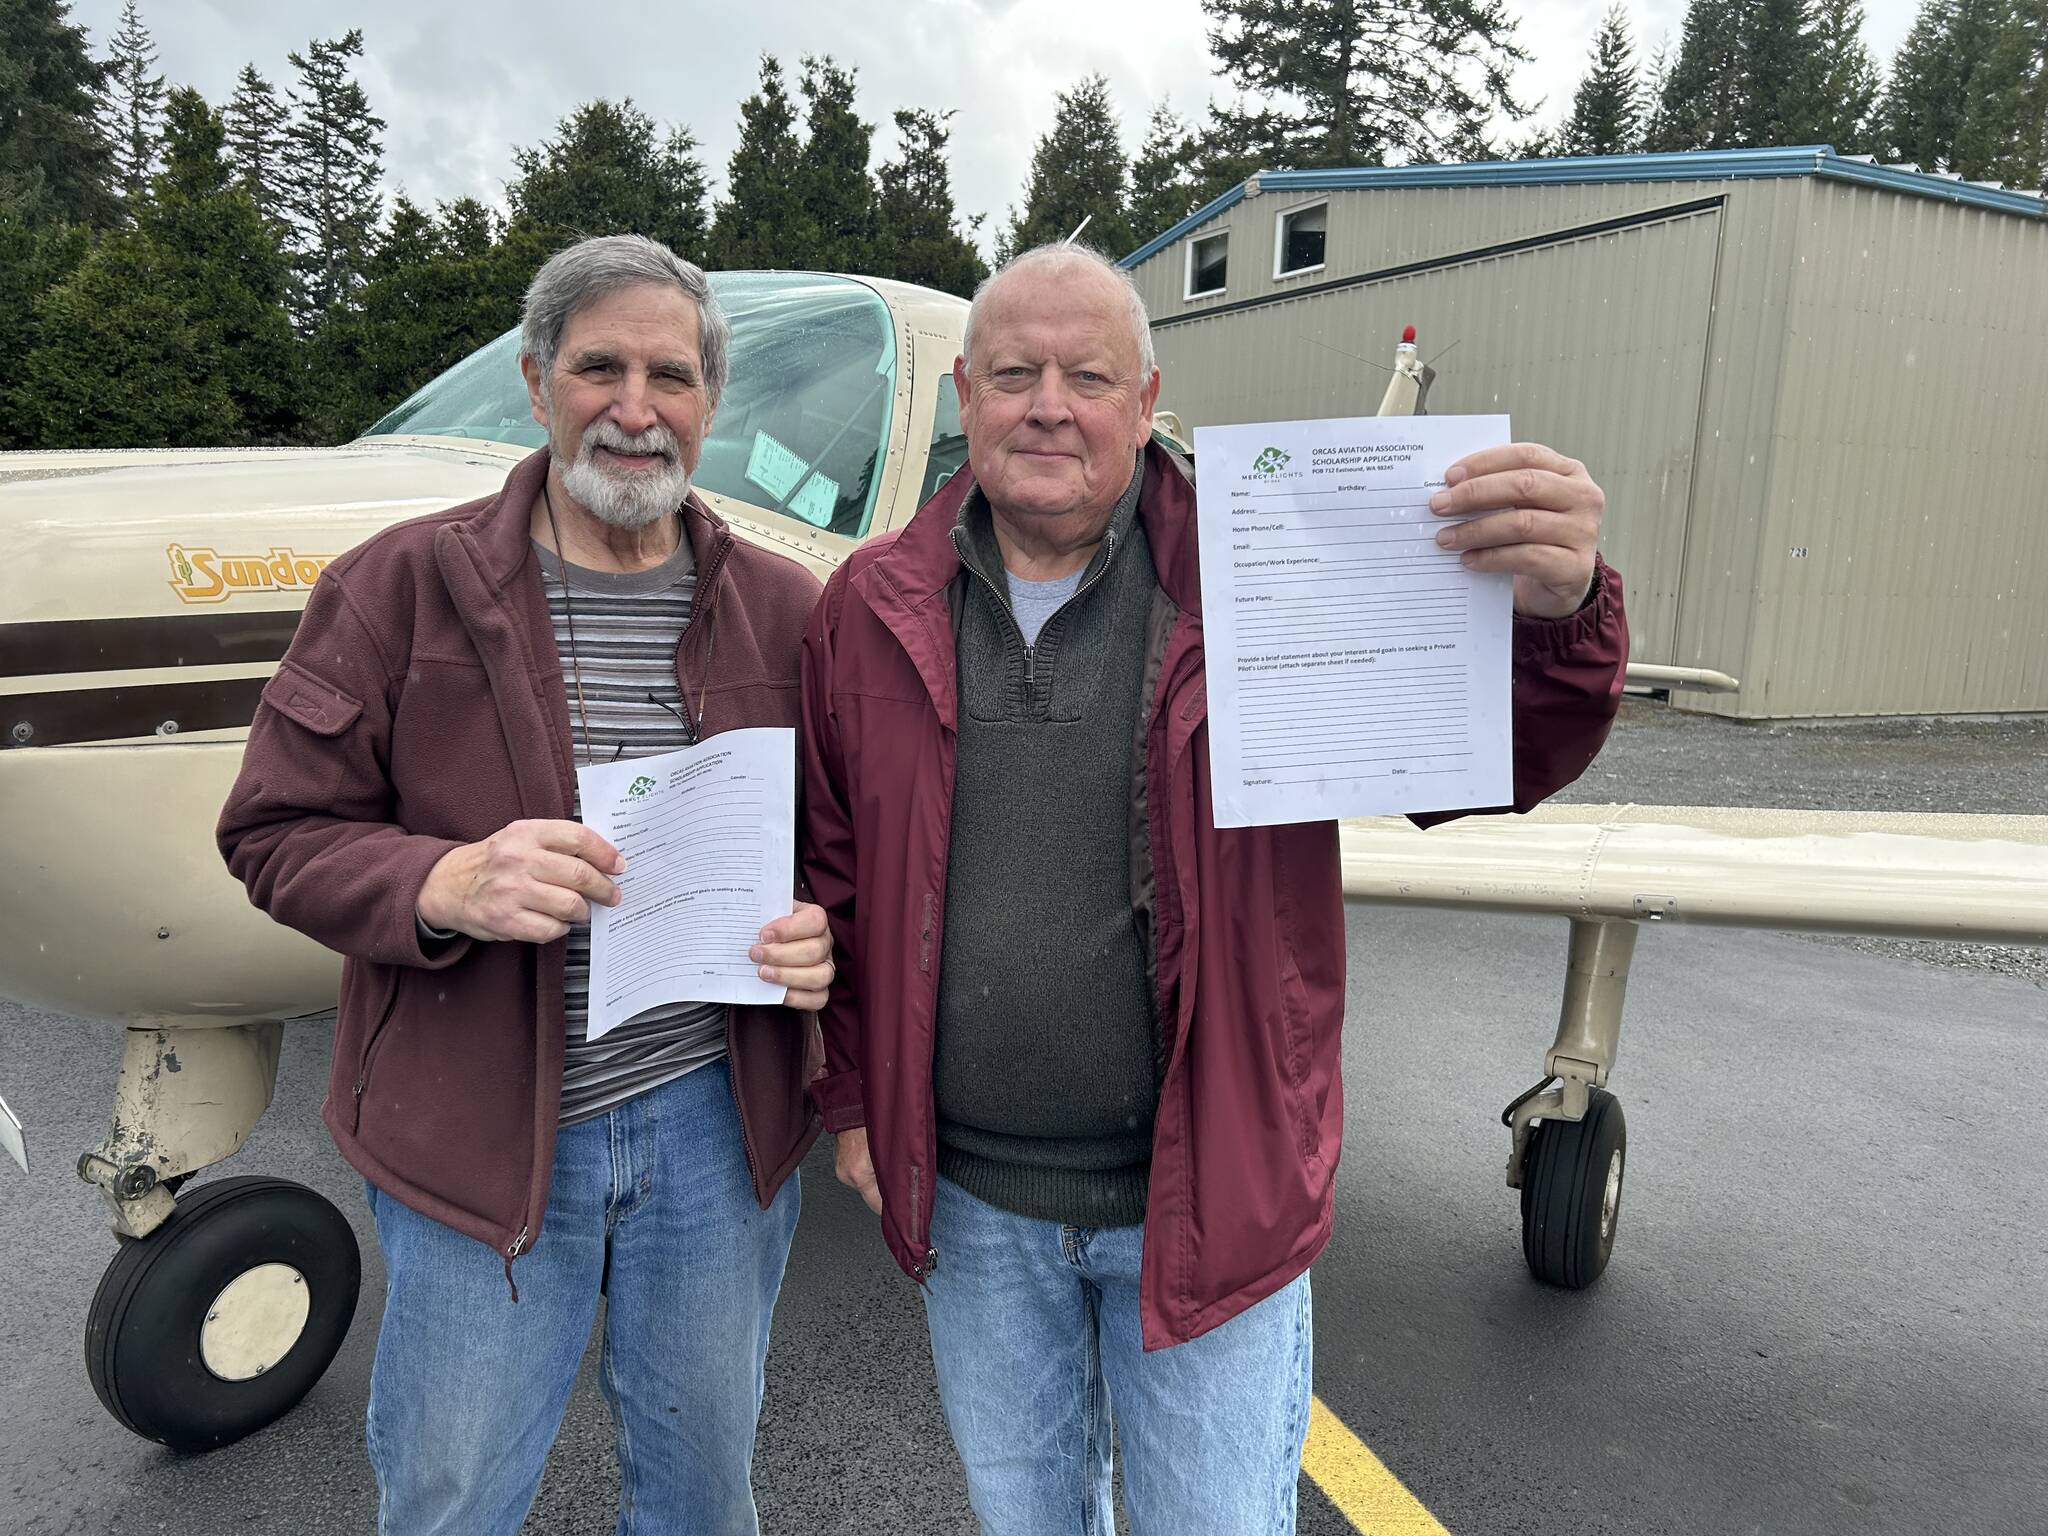 Jack Becker (left) Secretary/Treasurer of the Orcas Aviation Association and Rick Fant President of Airhawks Flying Club holding up the Scholarship Application form.